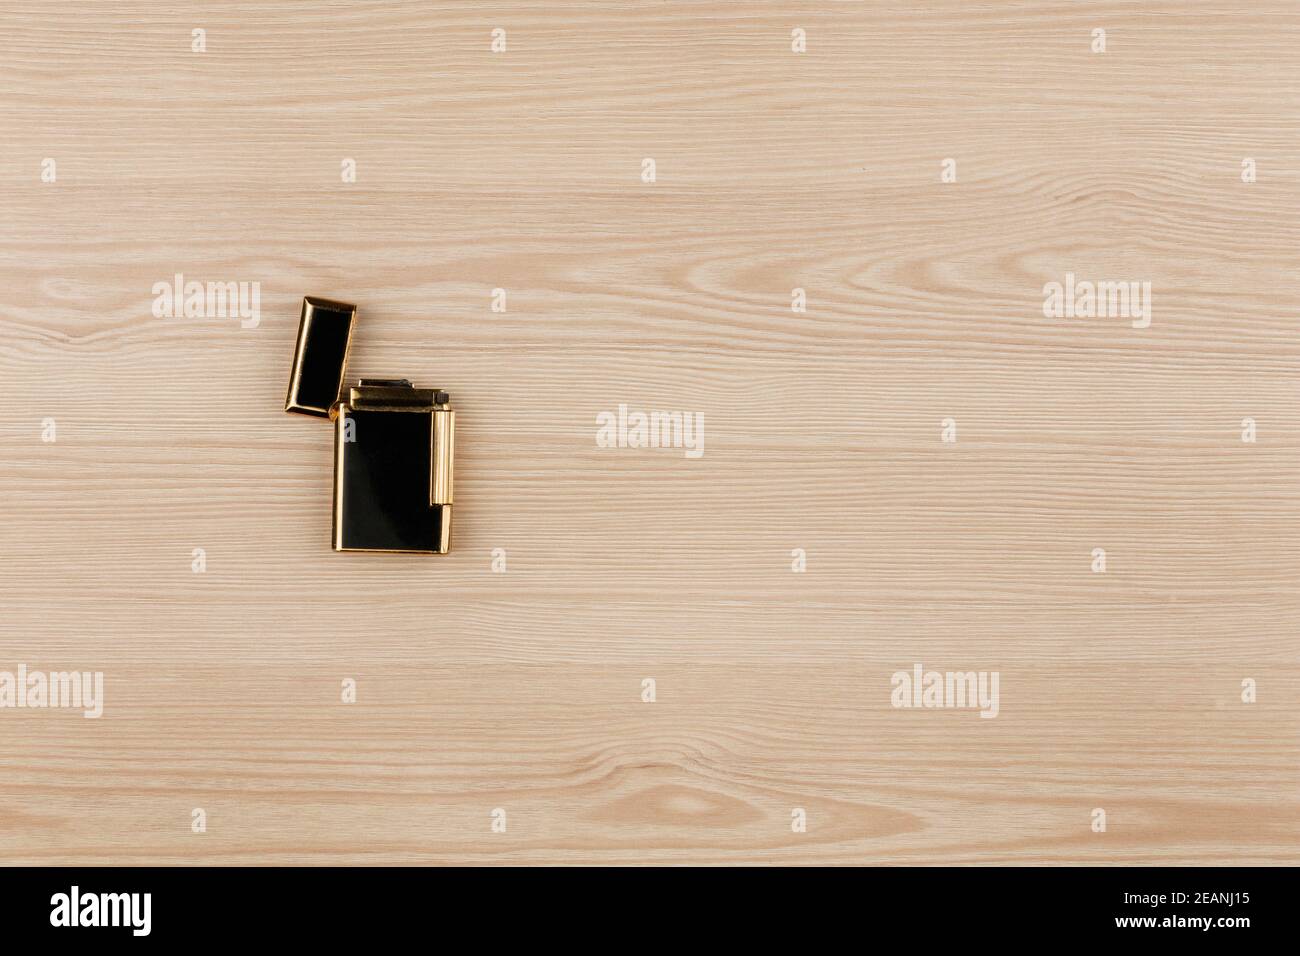 Luxury gold lighter lying on a wooden surface. With room for your text. Stock Photo